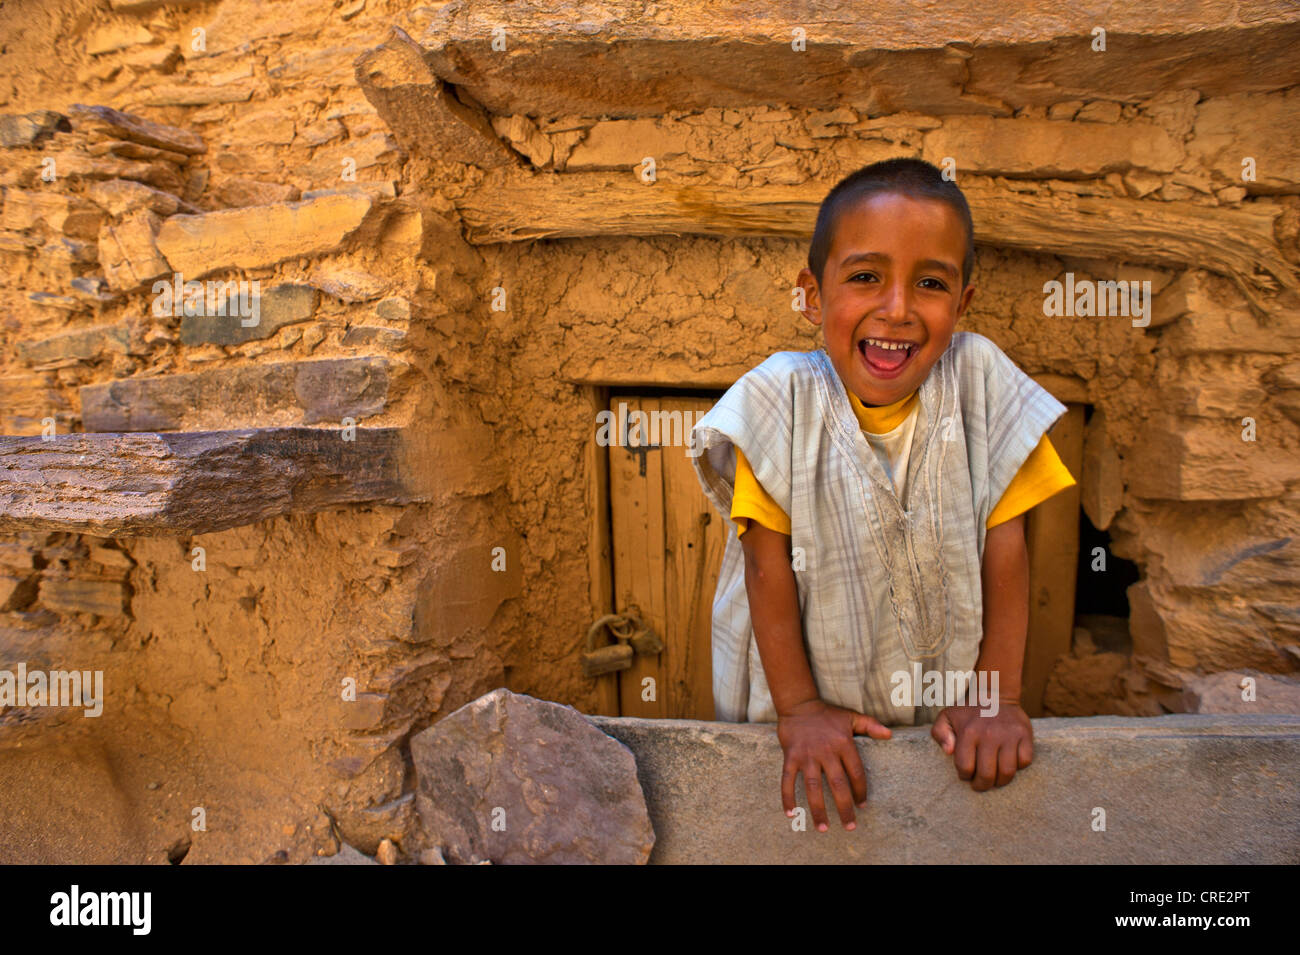 Happy young boy in front of the entrance to a chamber, Tasguent storage castle, Anti-Atlas, southern Morocco, Morocco, Africa Stock Photo